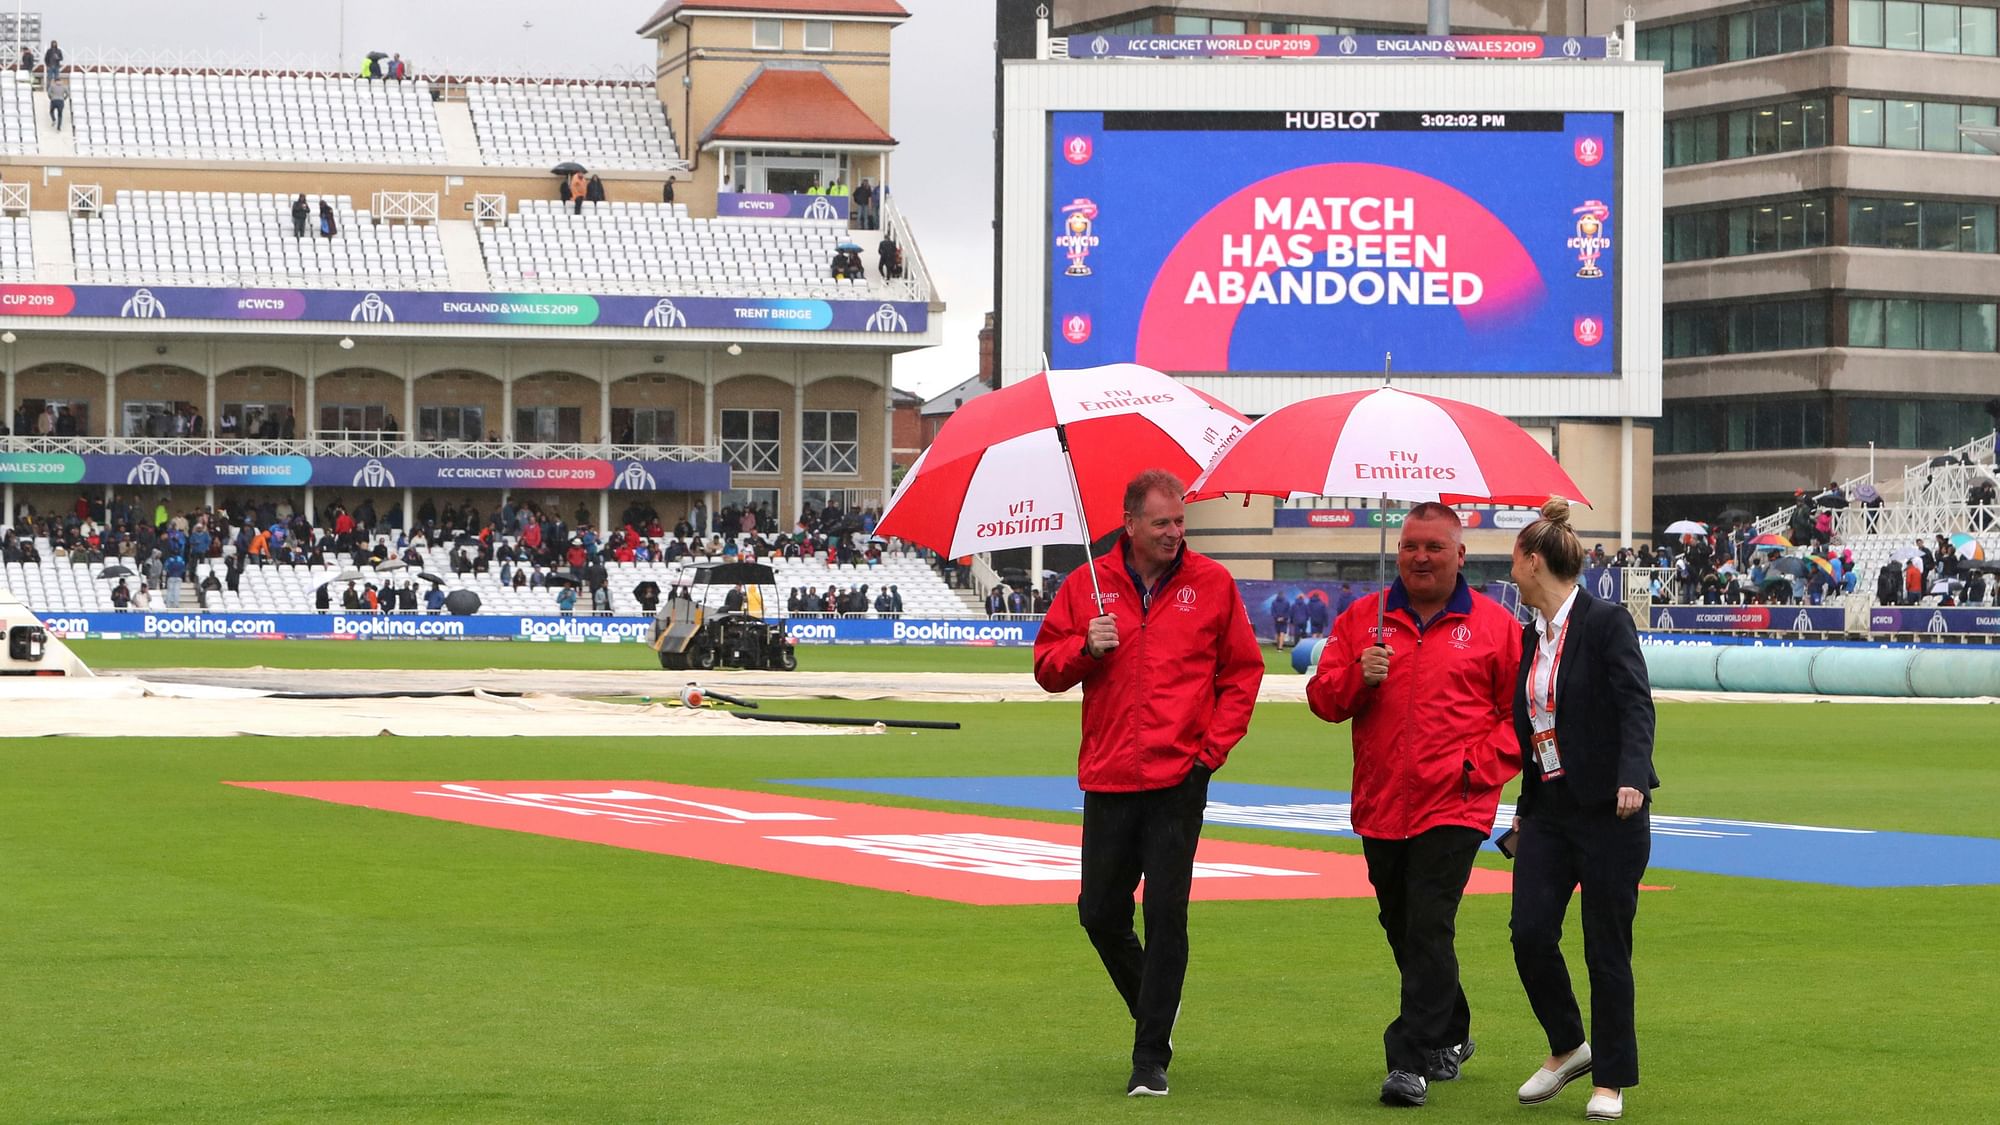 Indian vs New Zealand World Cup game was called off without a ball being bowled.